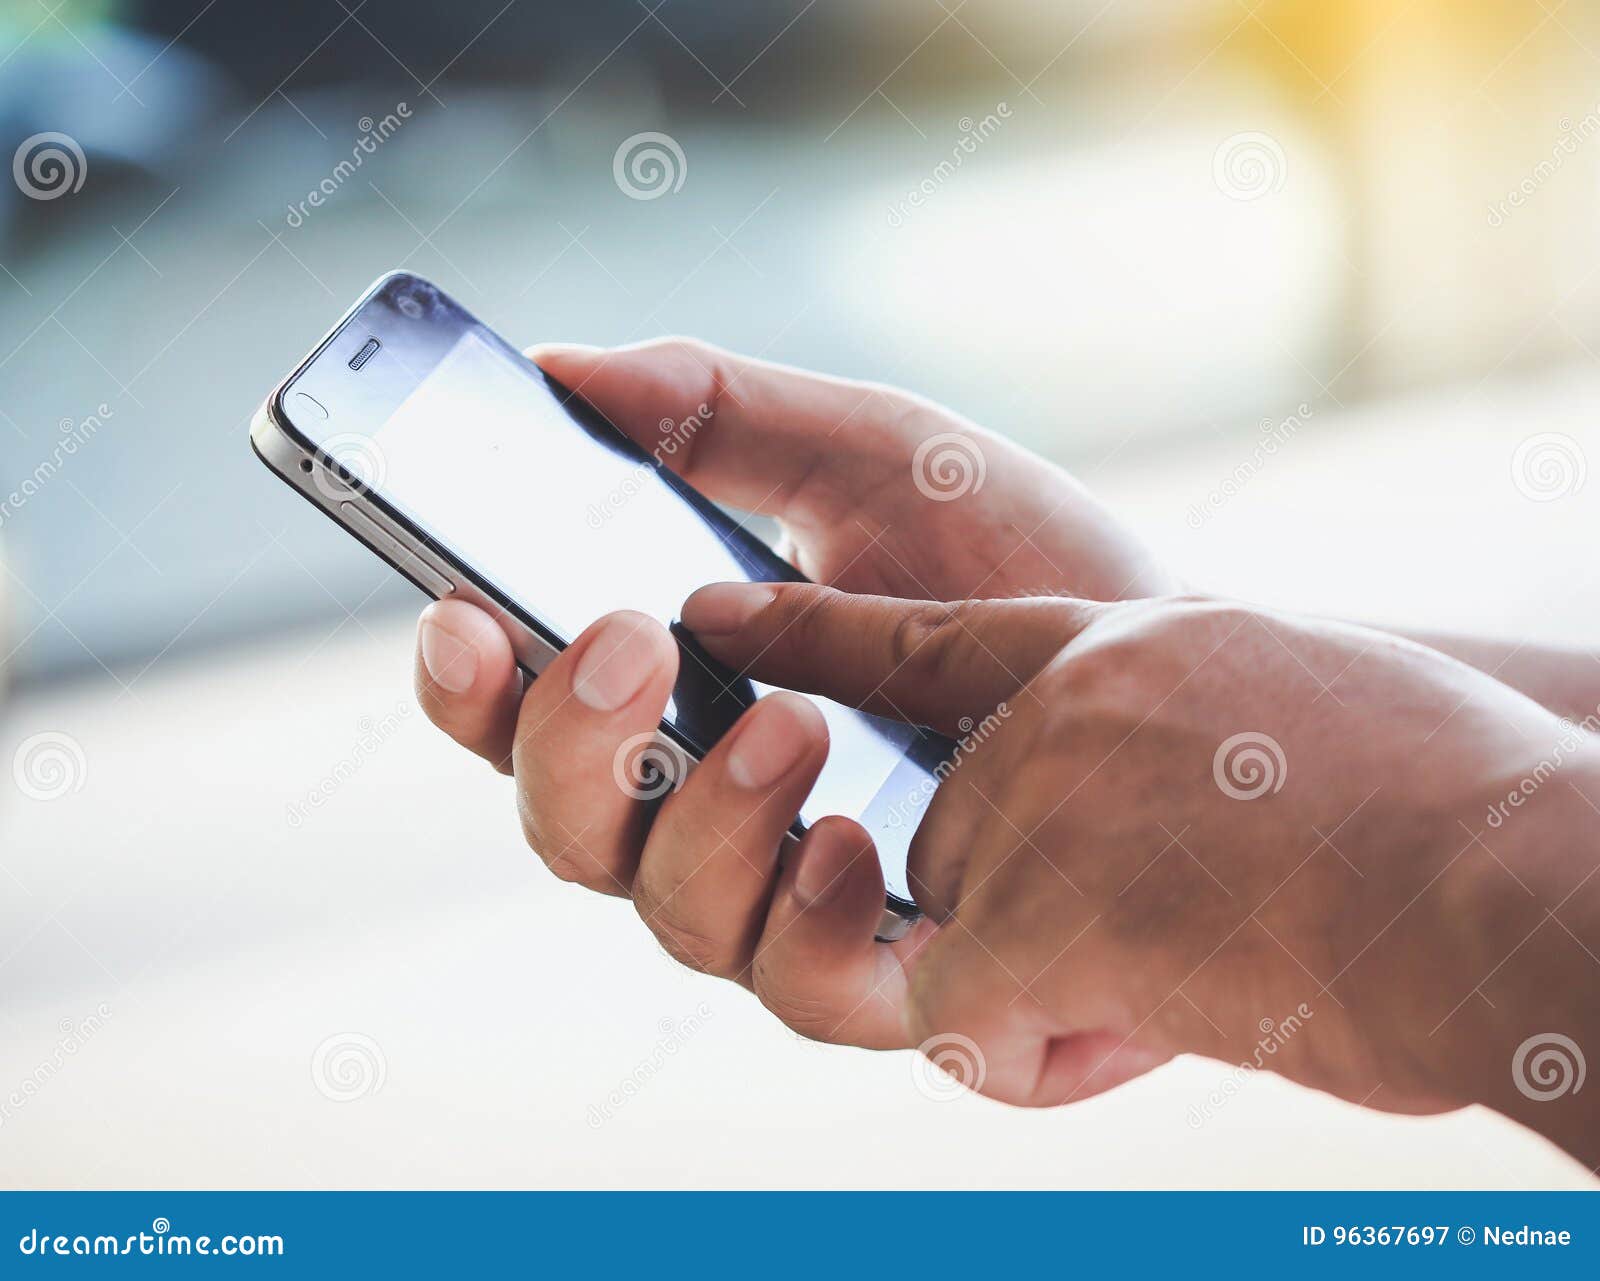 Man Hands Using a Smartphone. Stock Image - Image of point, online ...